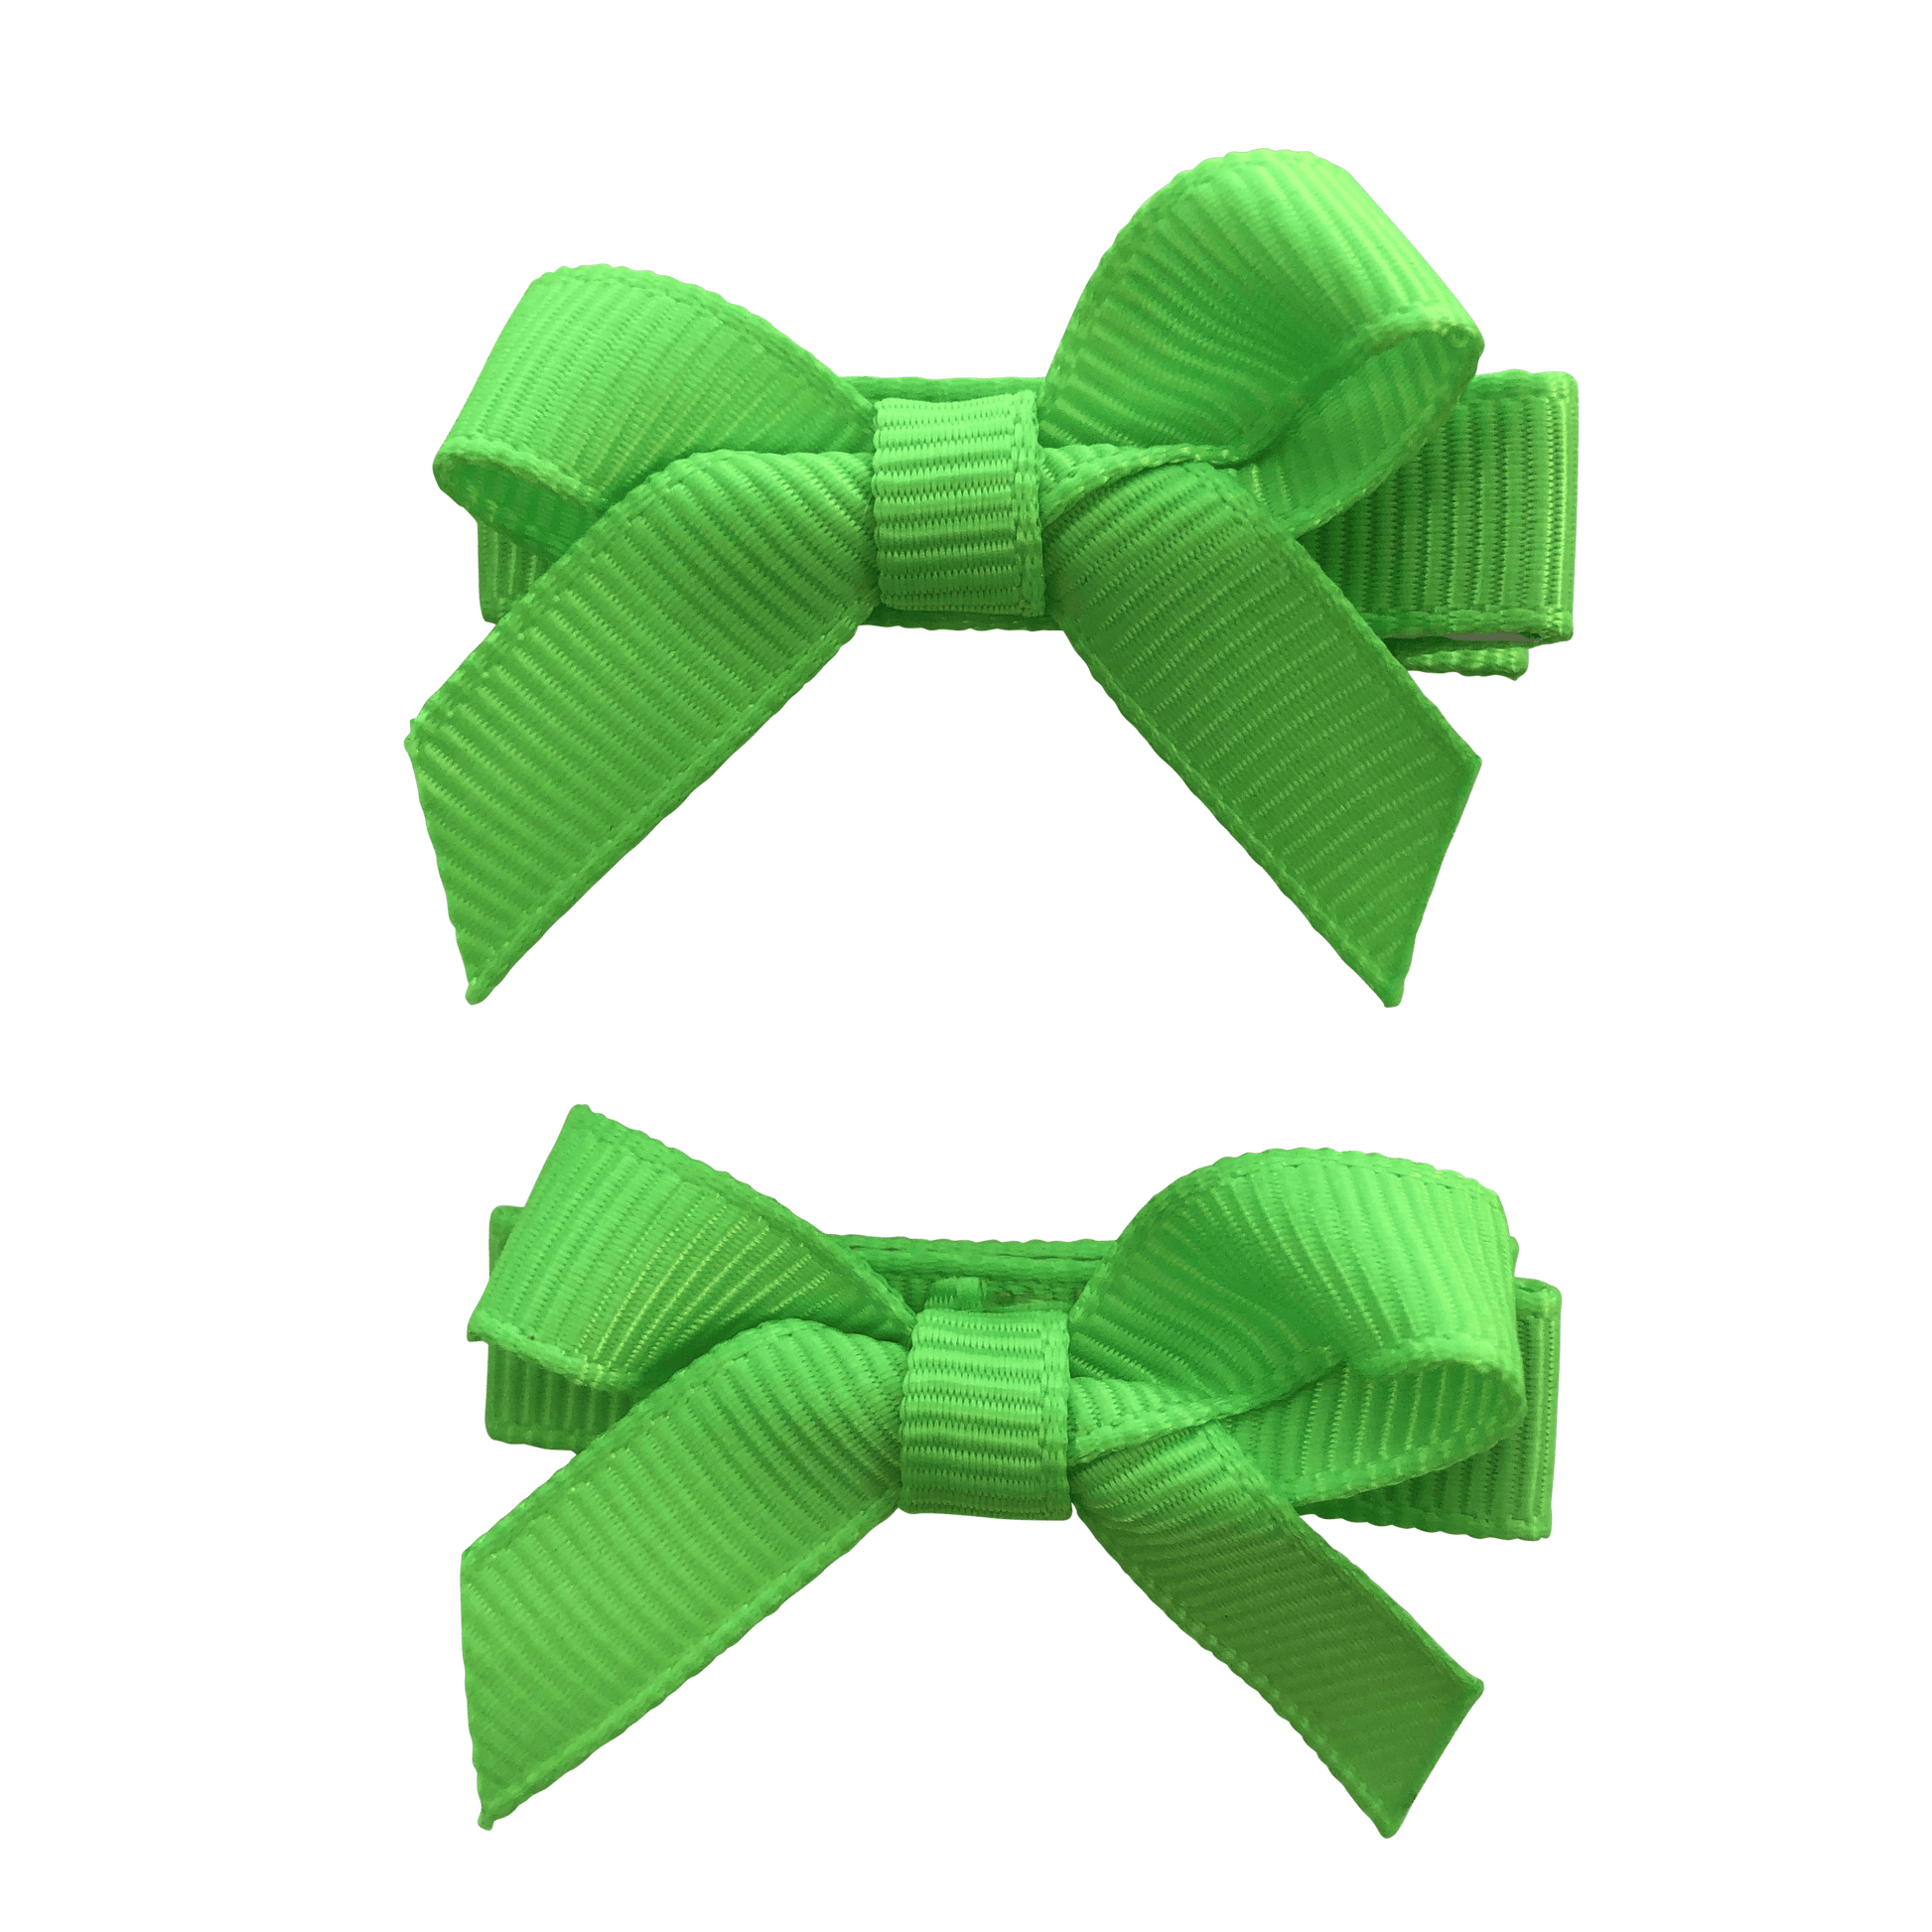 Fluoro Green Hair Accessories - Assorted Hair Accessories - School Uniform Hair Accessories - Ponytails and Fairytales